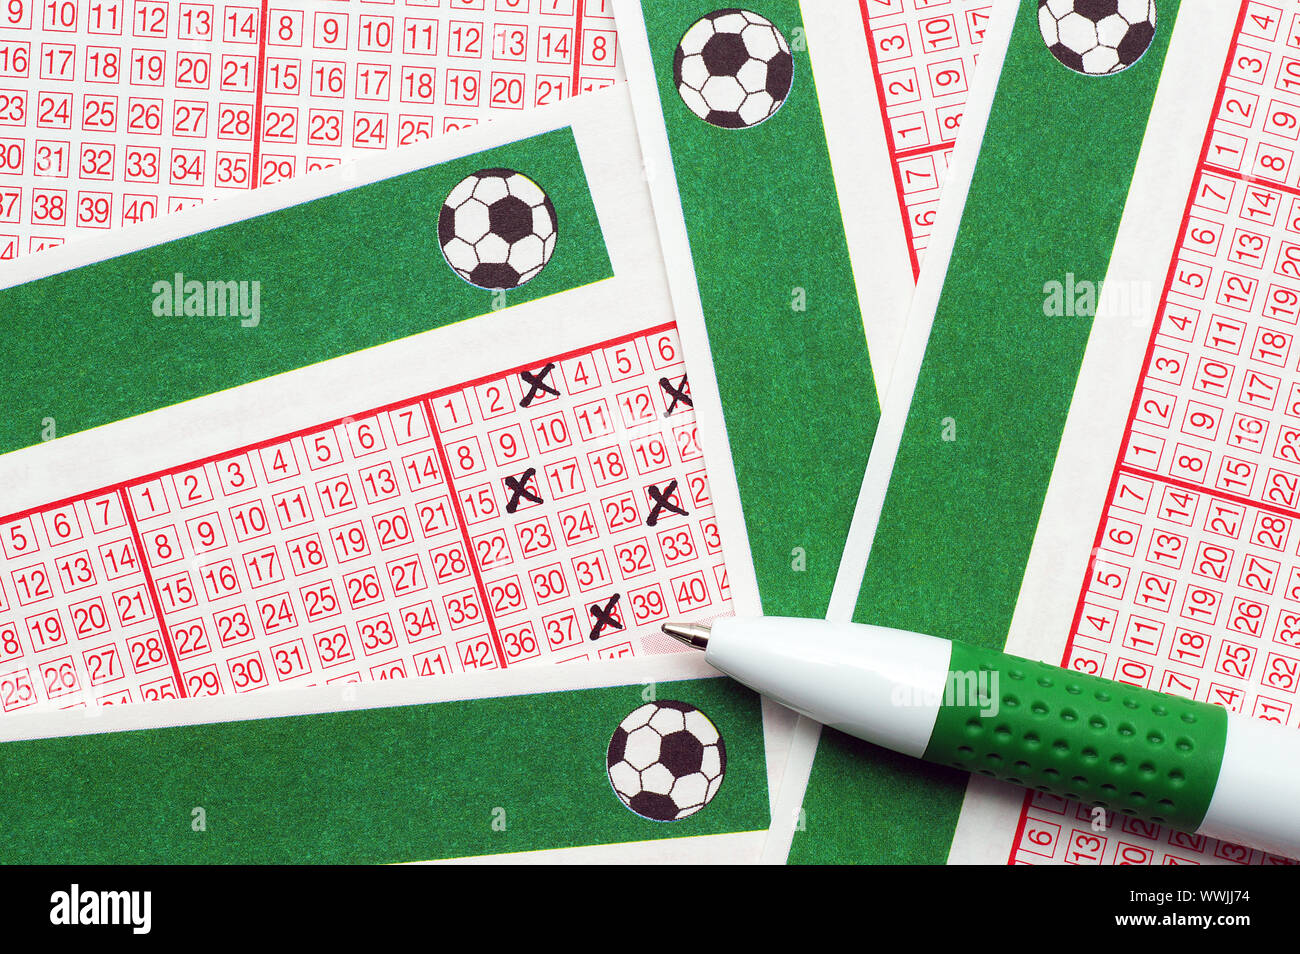 Toto/Lotto notes with pen Stock Photo - Alamy